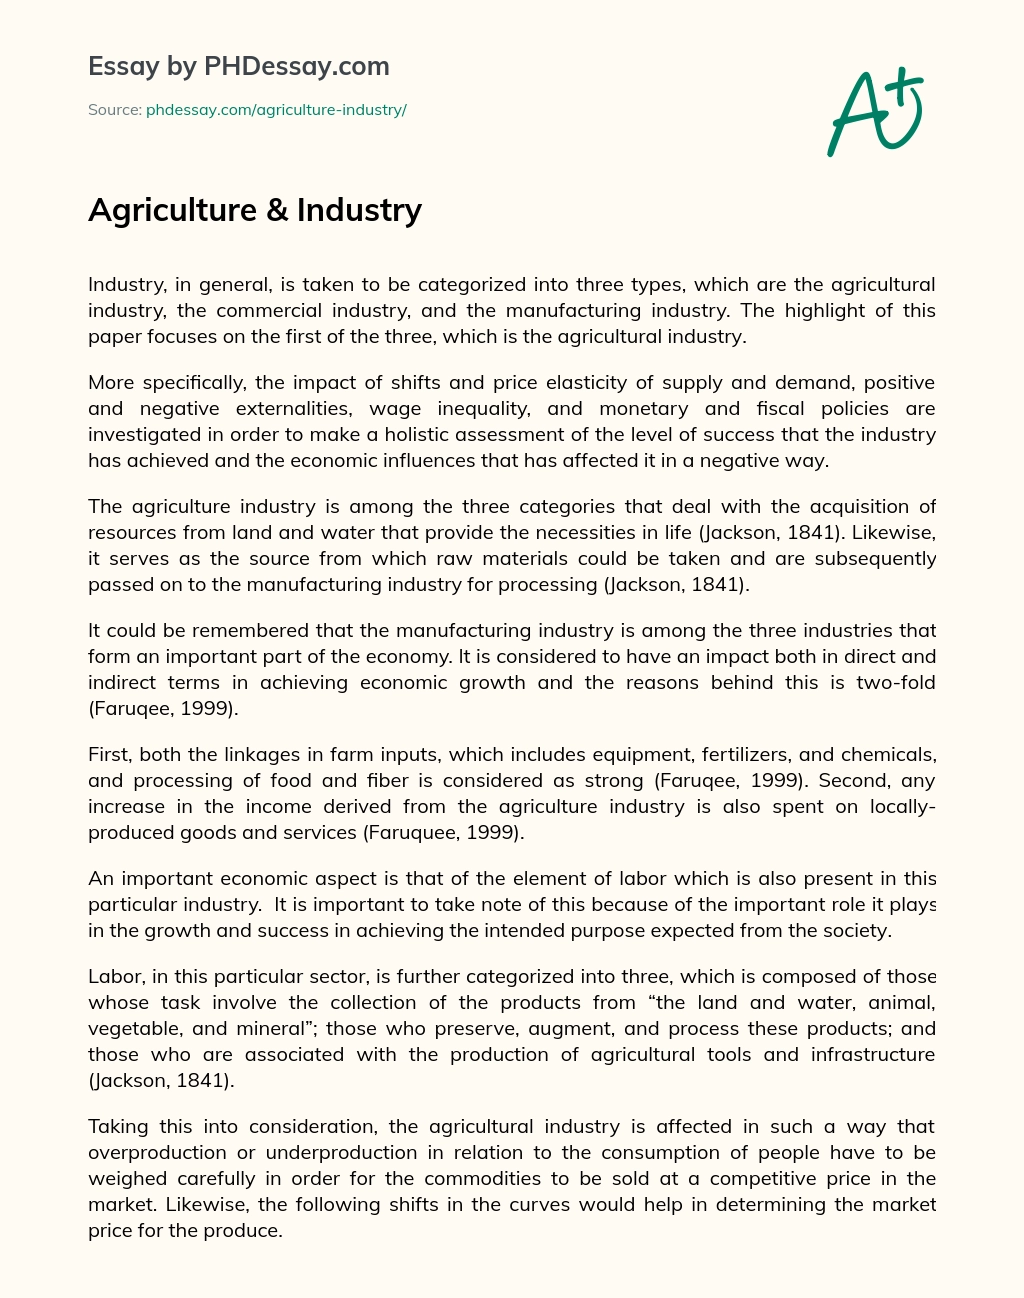 Agriculture & Industry essay